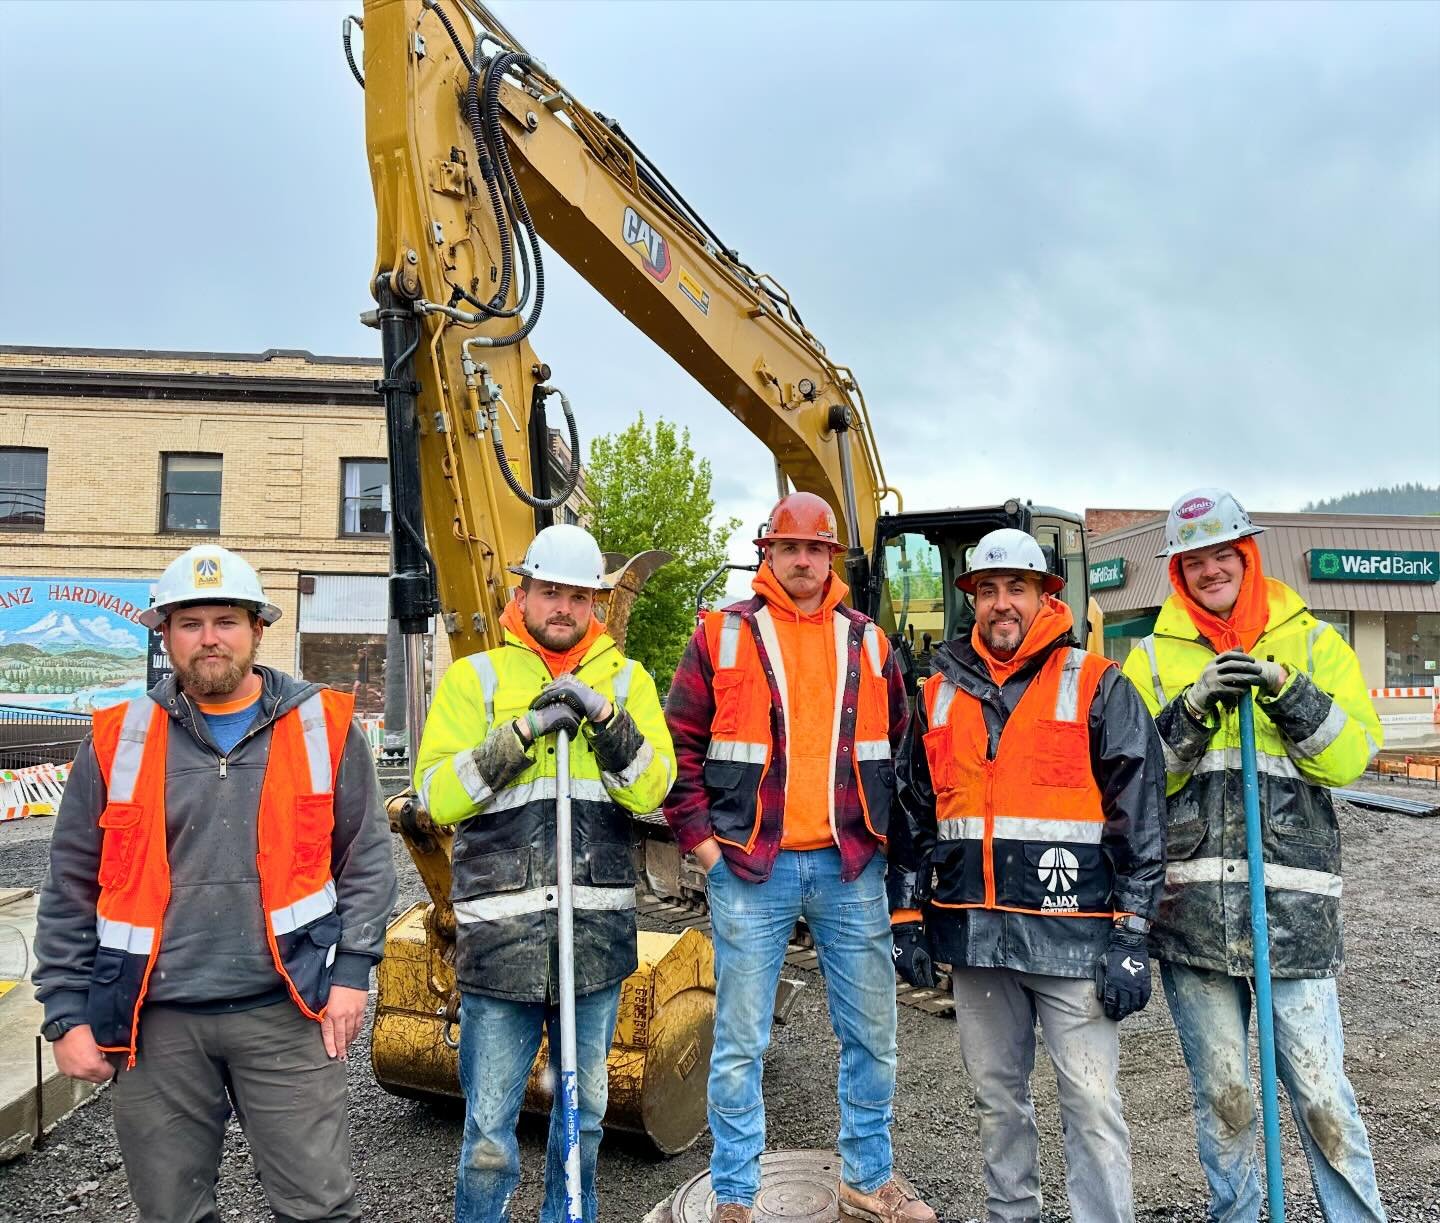 It&rsquo;s Meet the Team Monday! Meet the crew that has been busting it in downtown Hood River for the last few months. Andrew, Sam, Zach, Myke and Gabe have been working hard to get the 2nd and Oak intersection all ready for summer traffic. It&rsquo